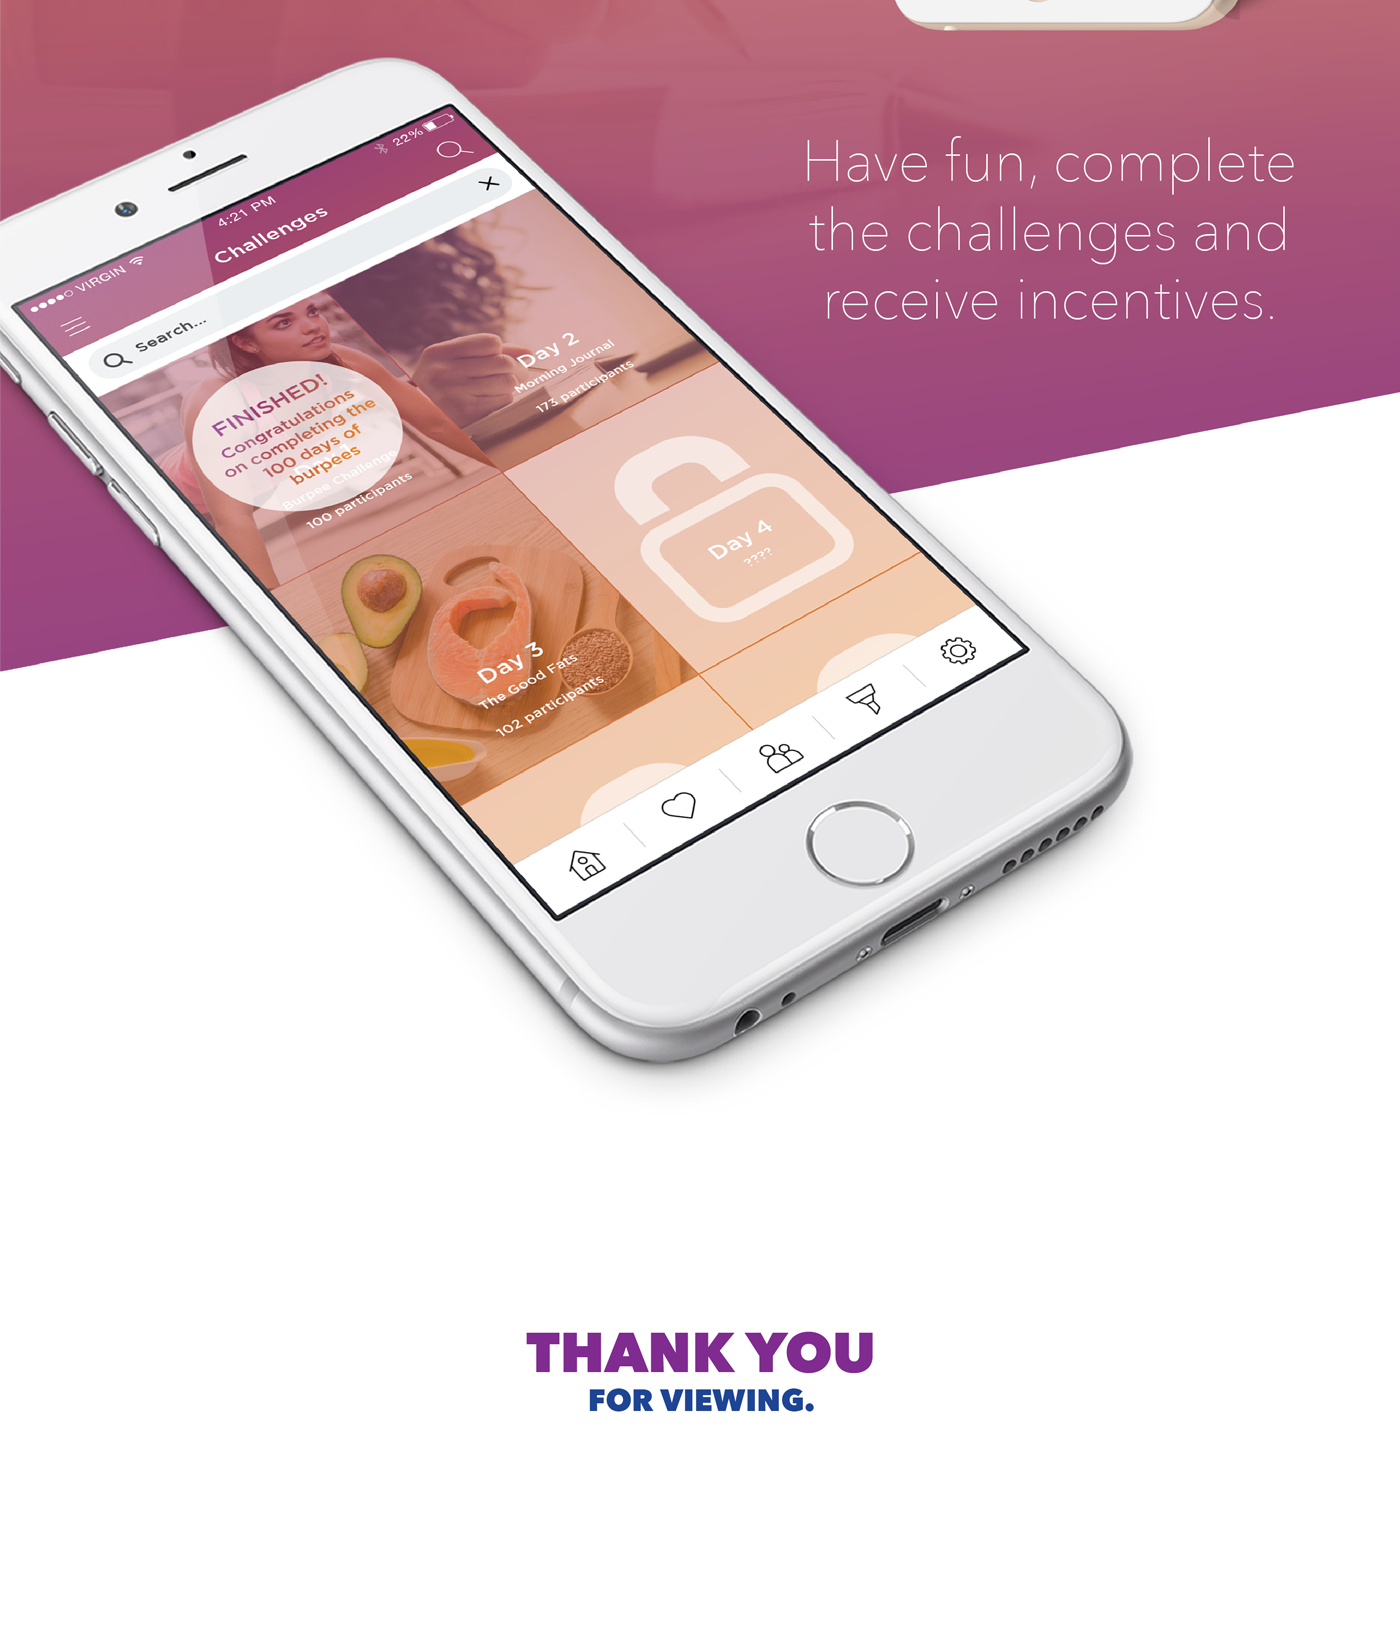 Health HMO campaign anniversary medical application app Did you know? ios healthcare